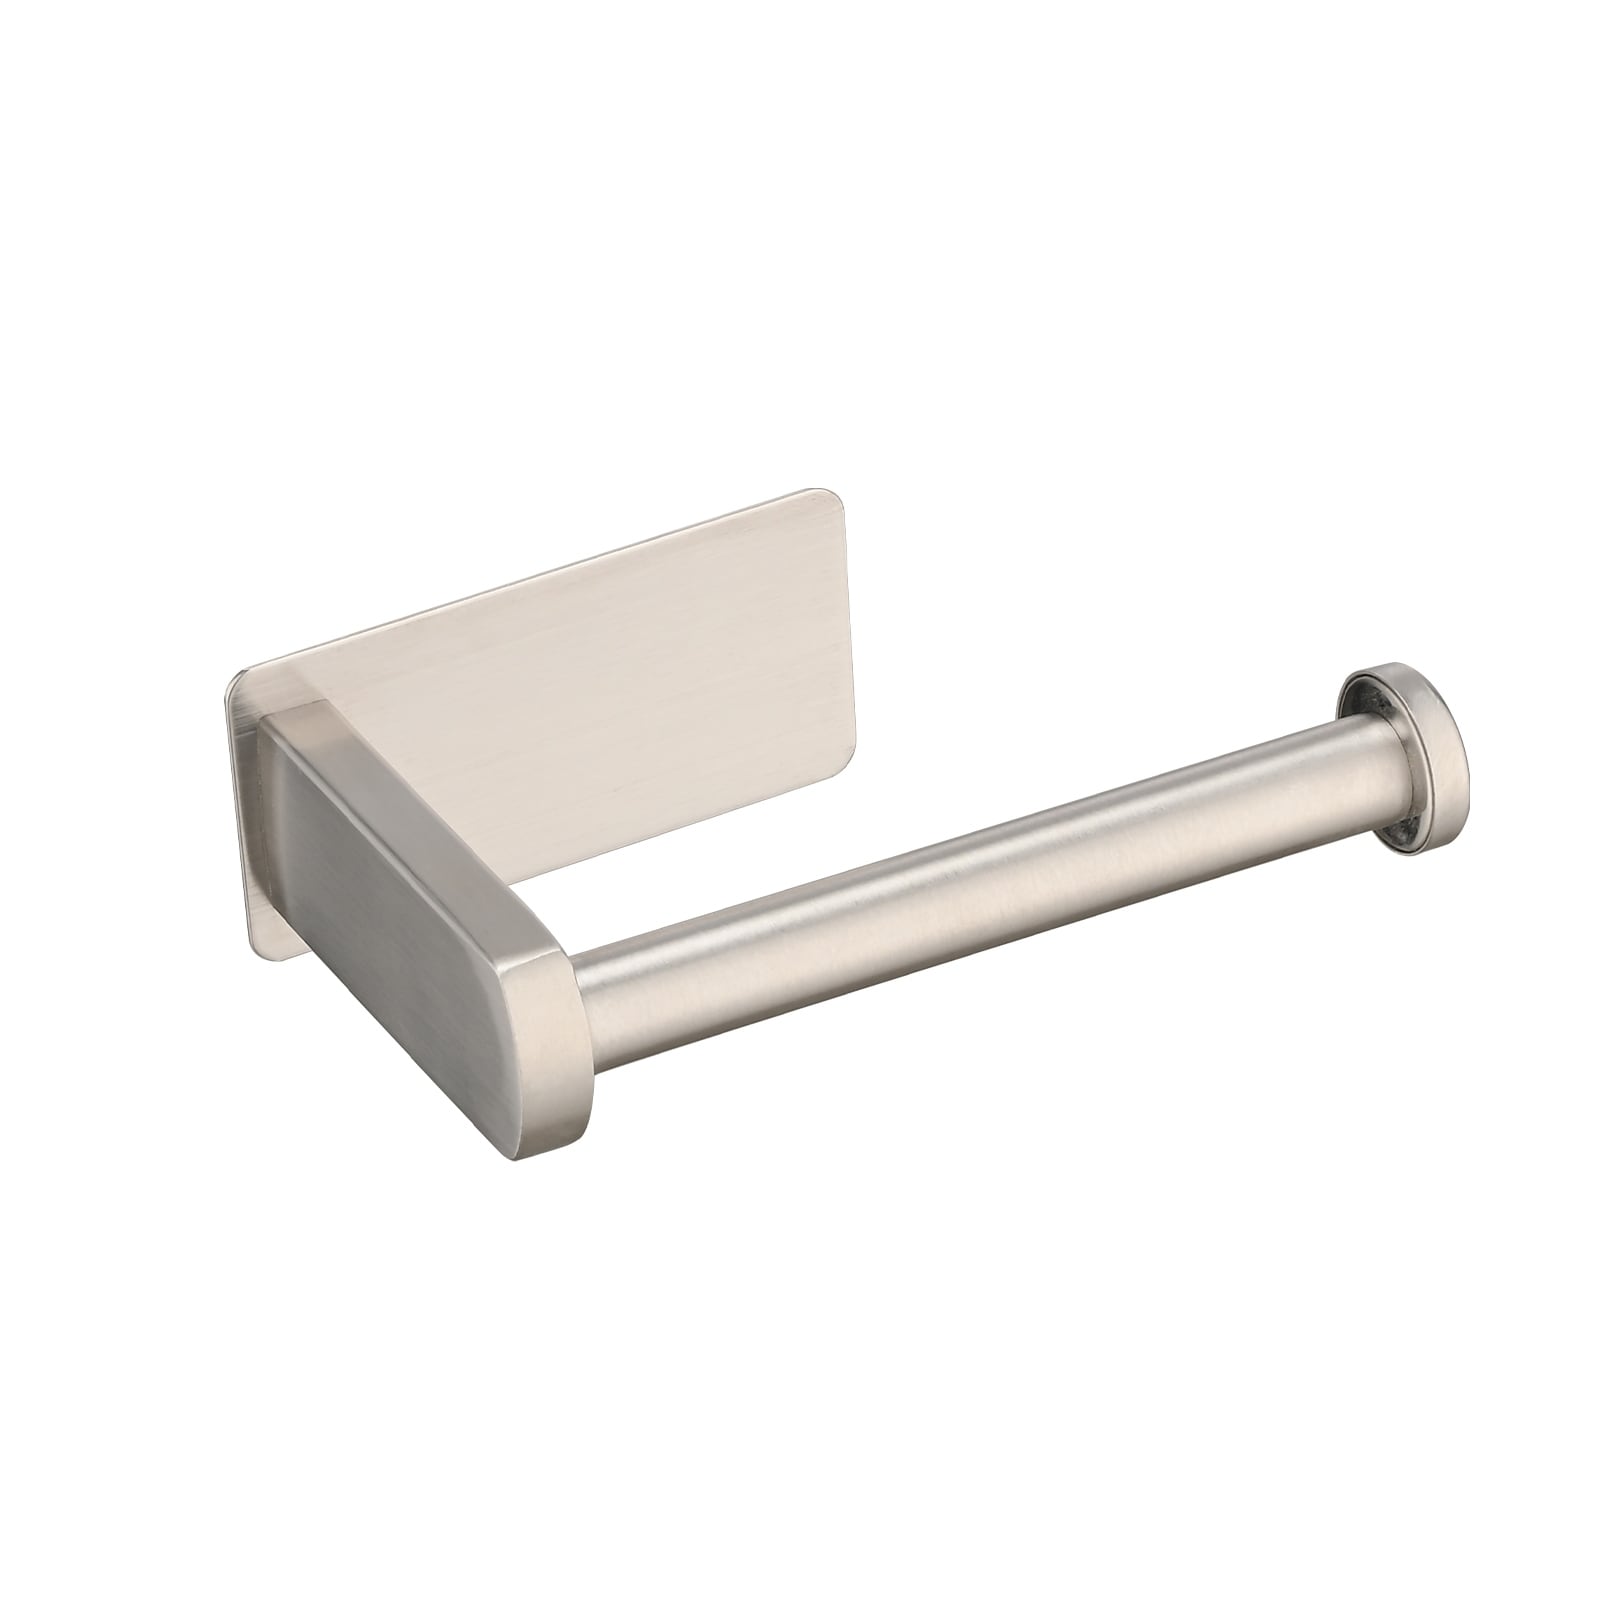 https://ak1.ostkcdn.com/images/products/is/images/direct/1e9625ff537e81e04dc6bbd4dc8763c4c887d7f6/Stainless-Steel-Rustproof-Adhesive-Toilet-Paper-Holder-Self.jpg